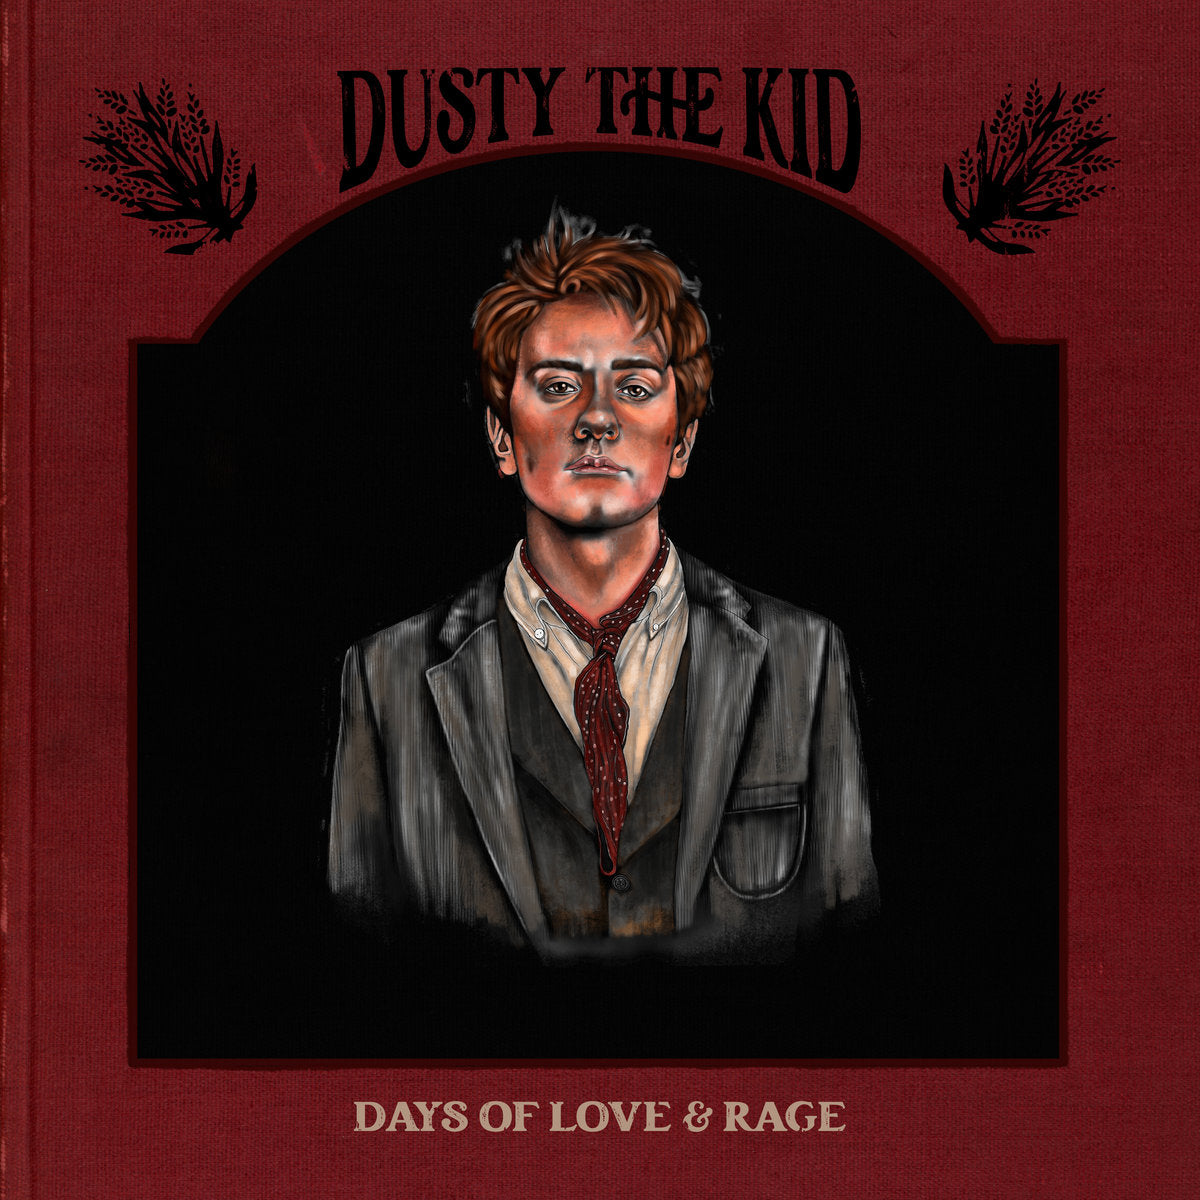 Dusty The Kid - Days of Love and Rage